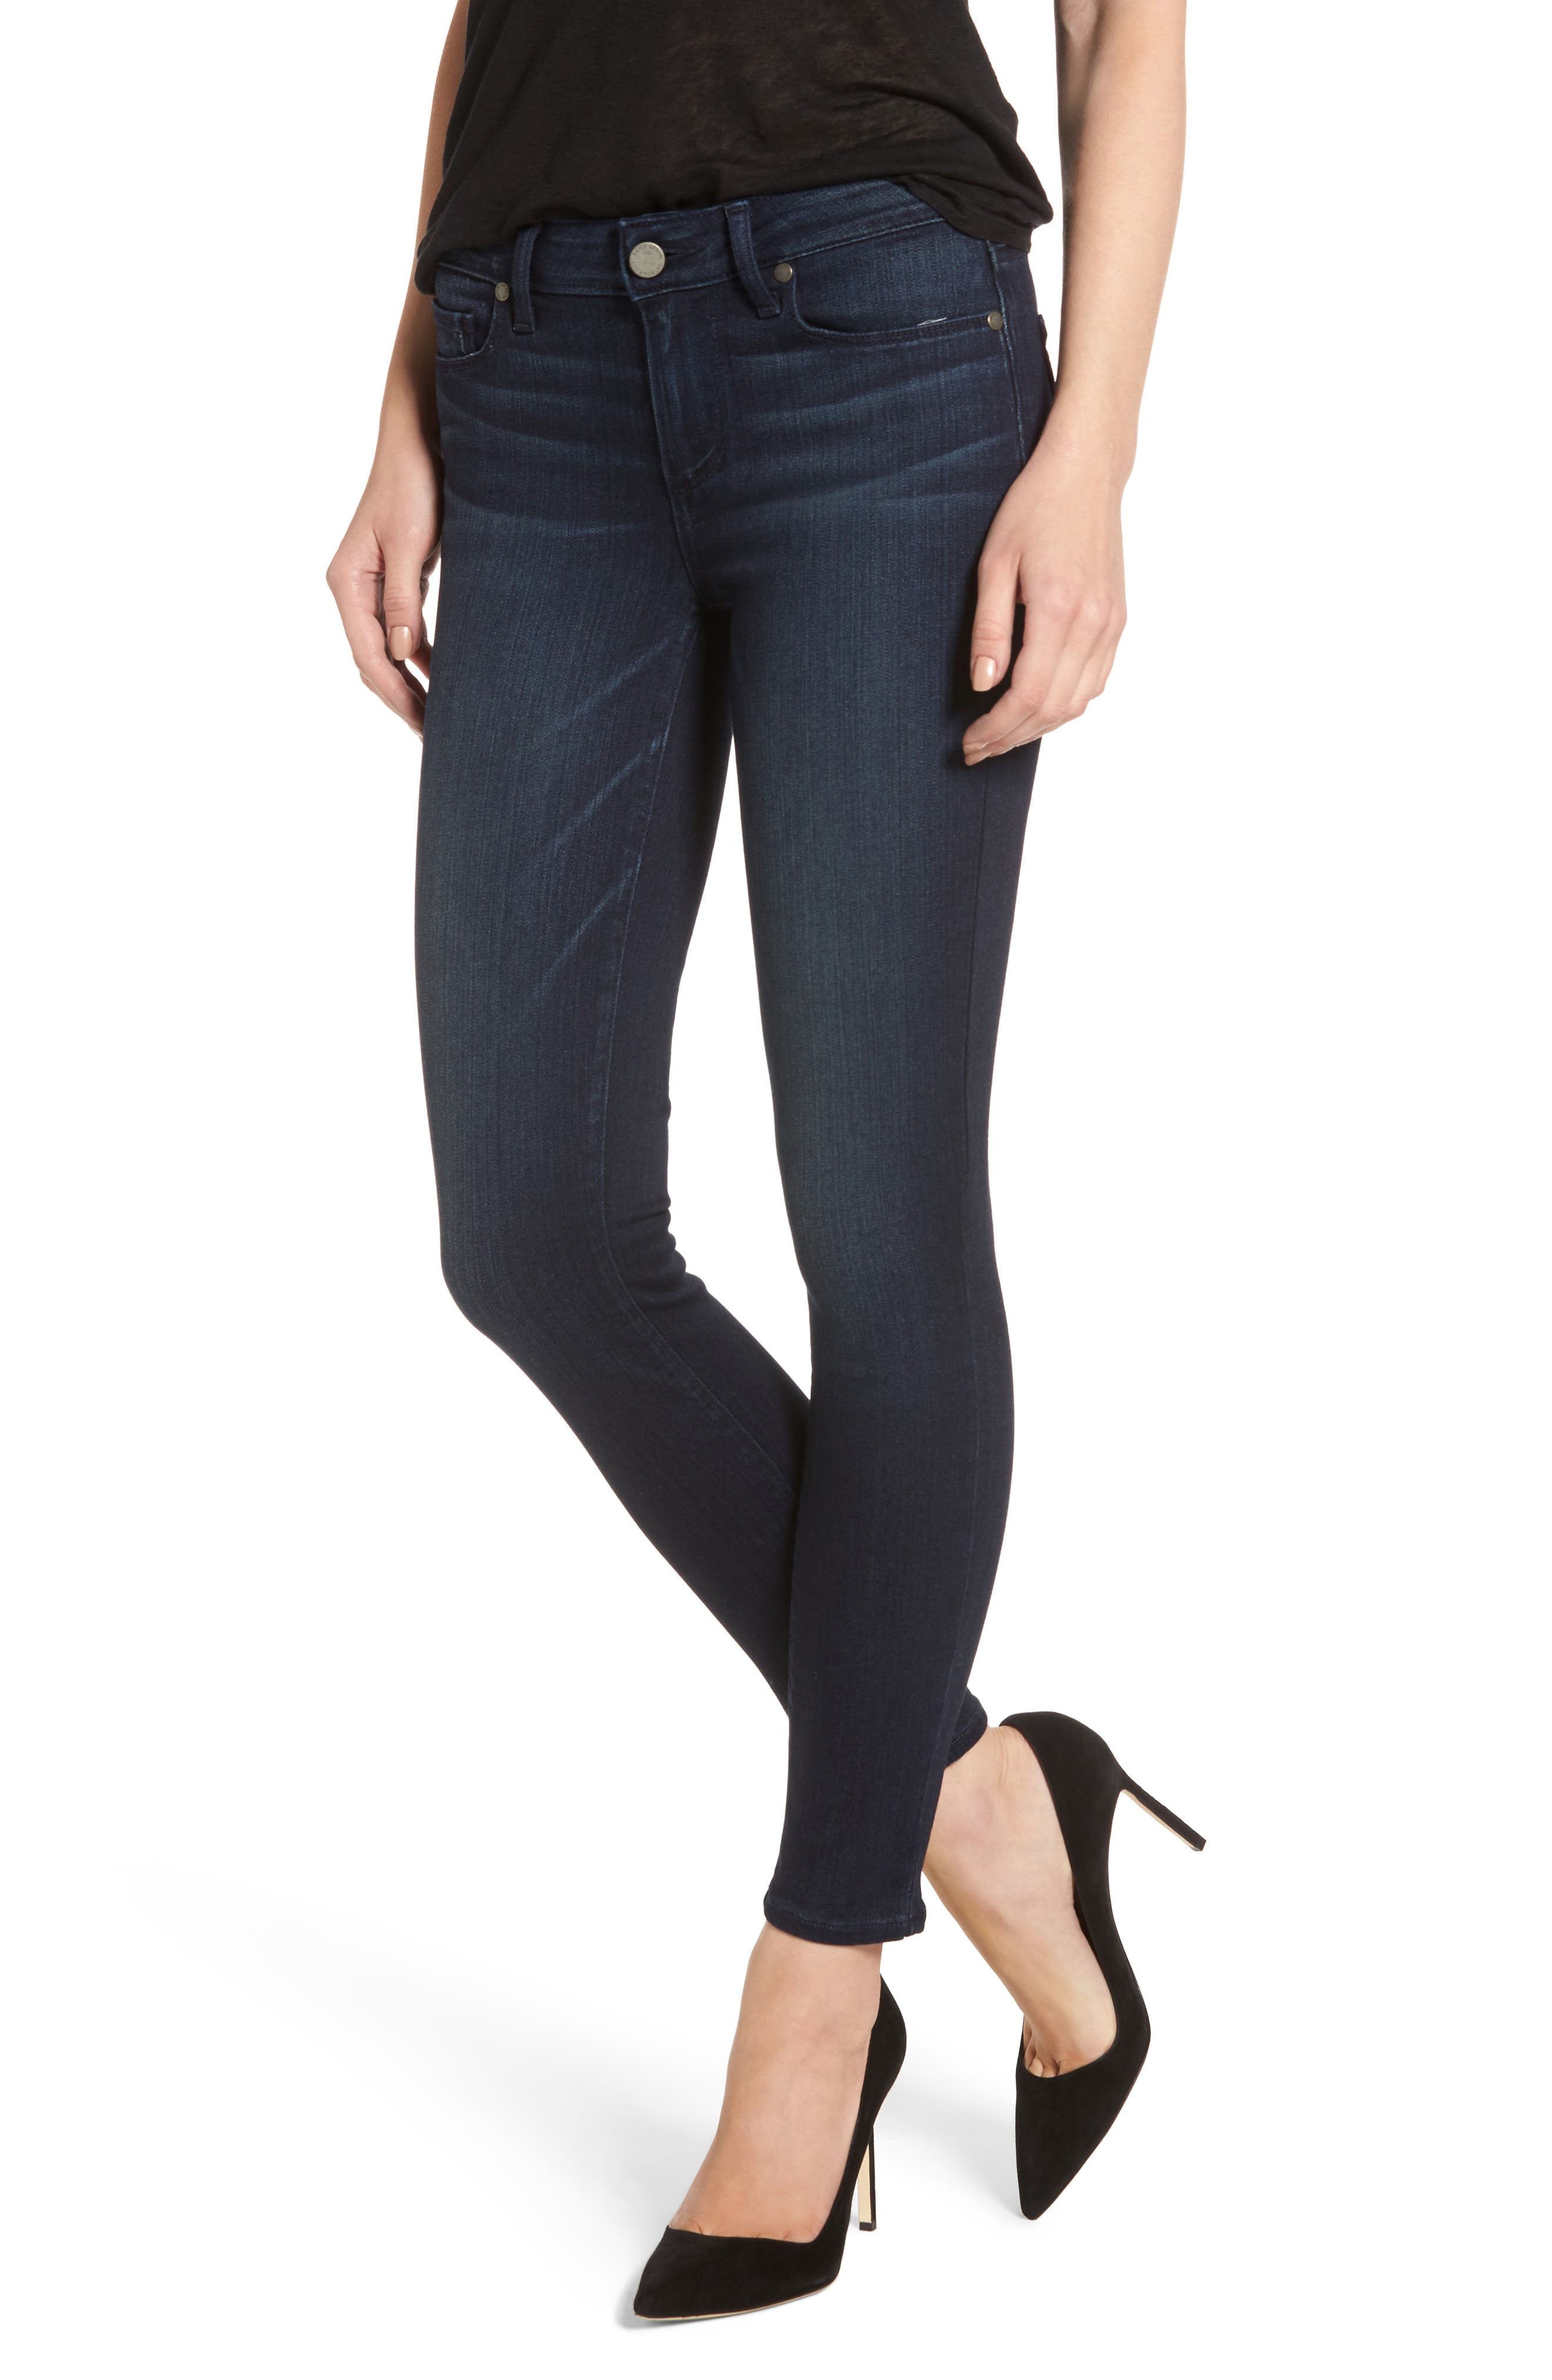 nordstrom paige jeans womens